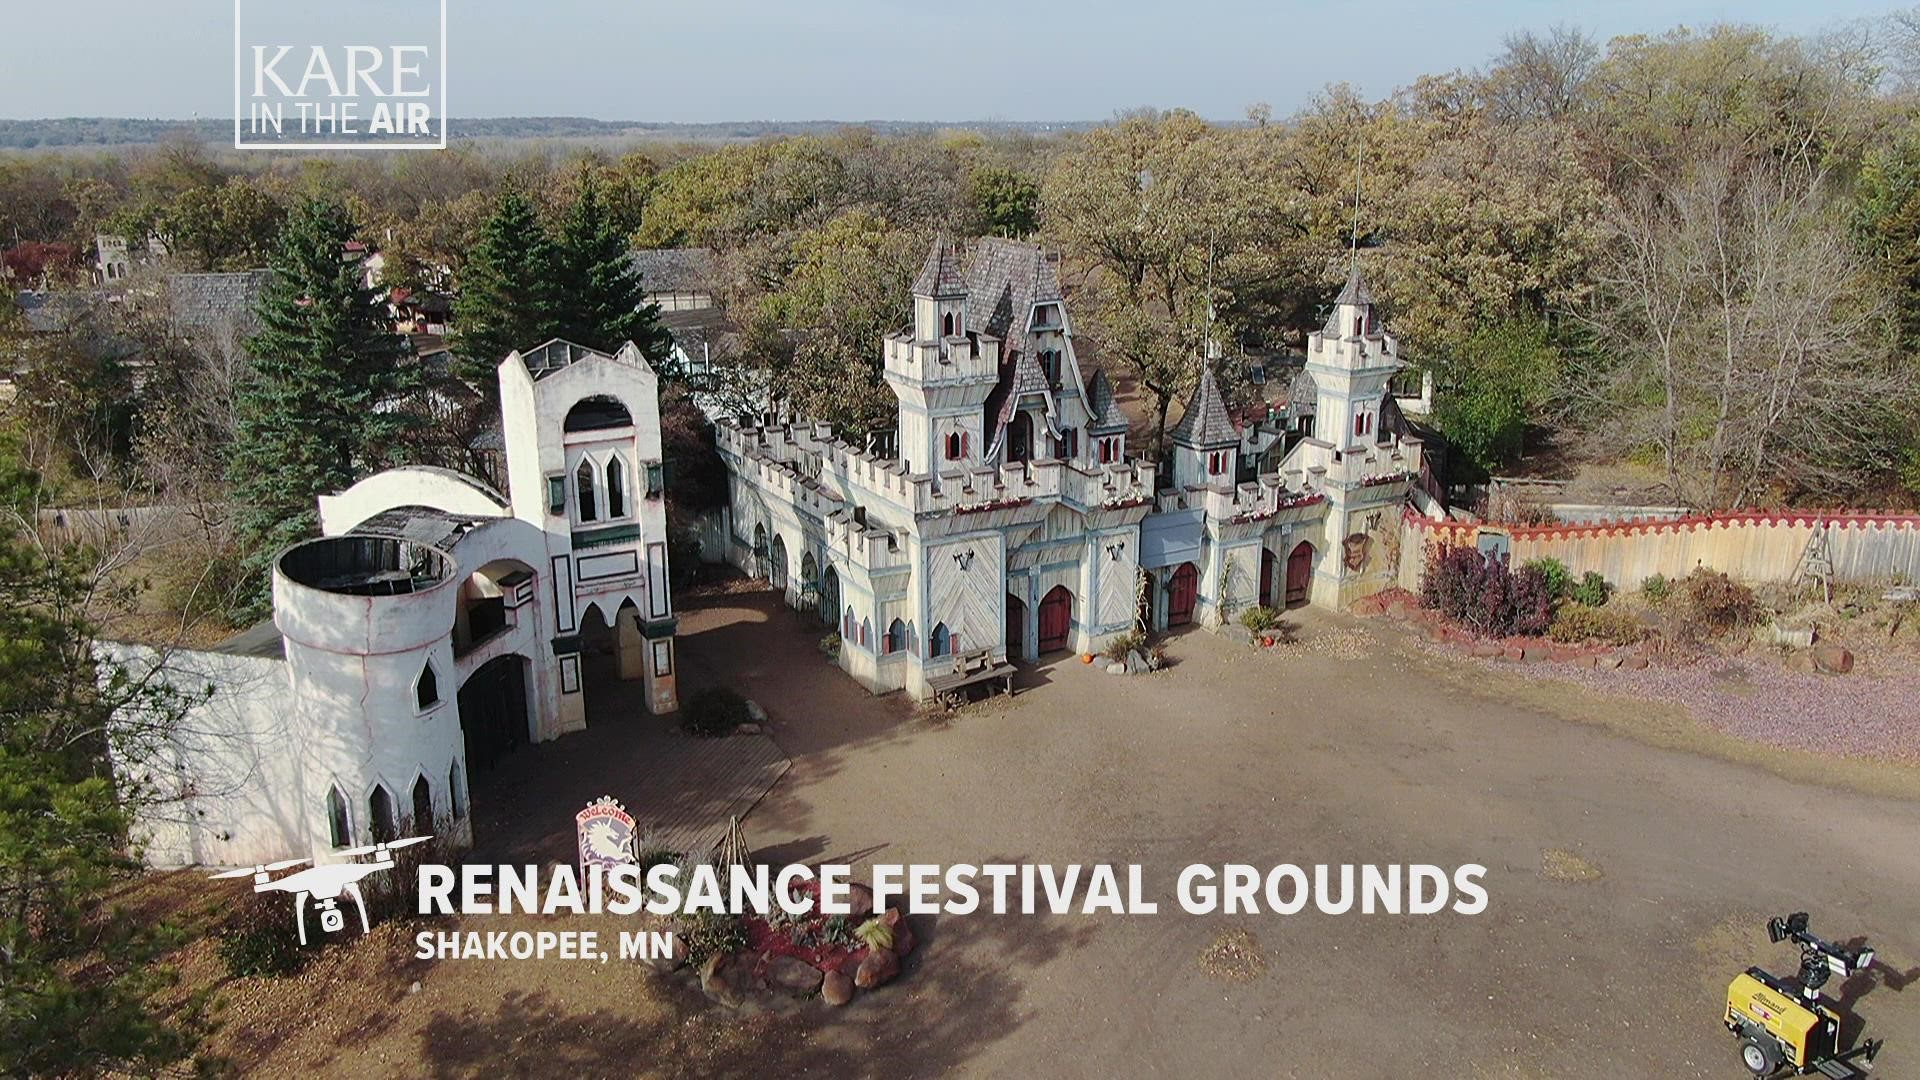 The Minnesota Renaissance Festival has grown into the largest of its kind in the United States, according to the festival's website.